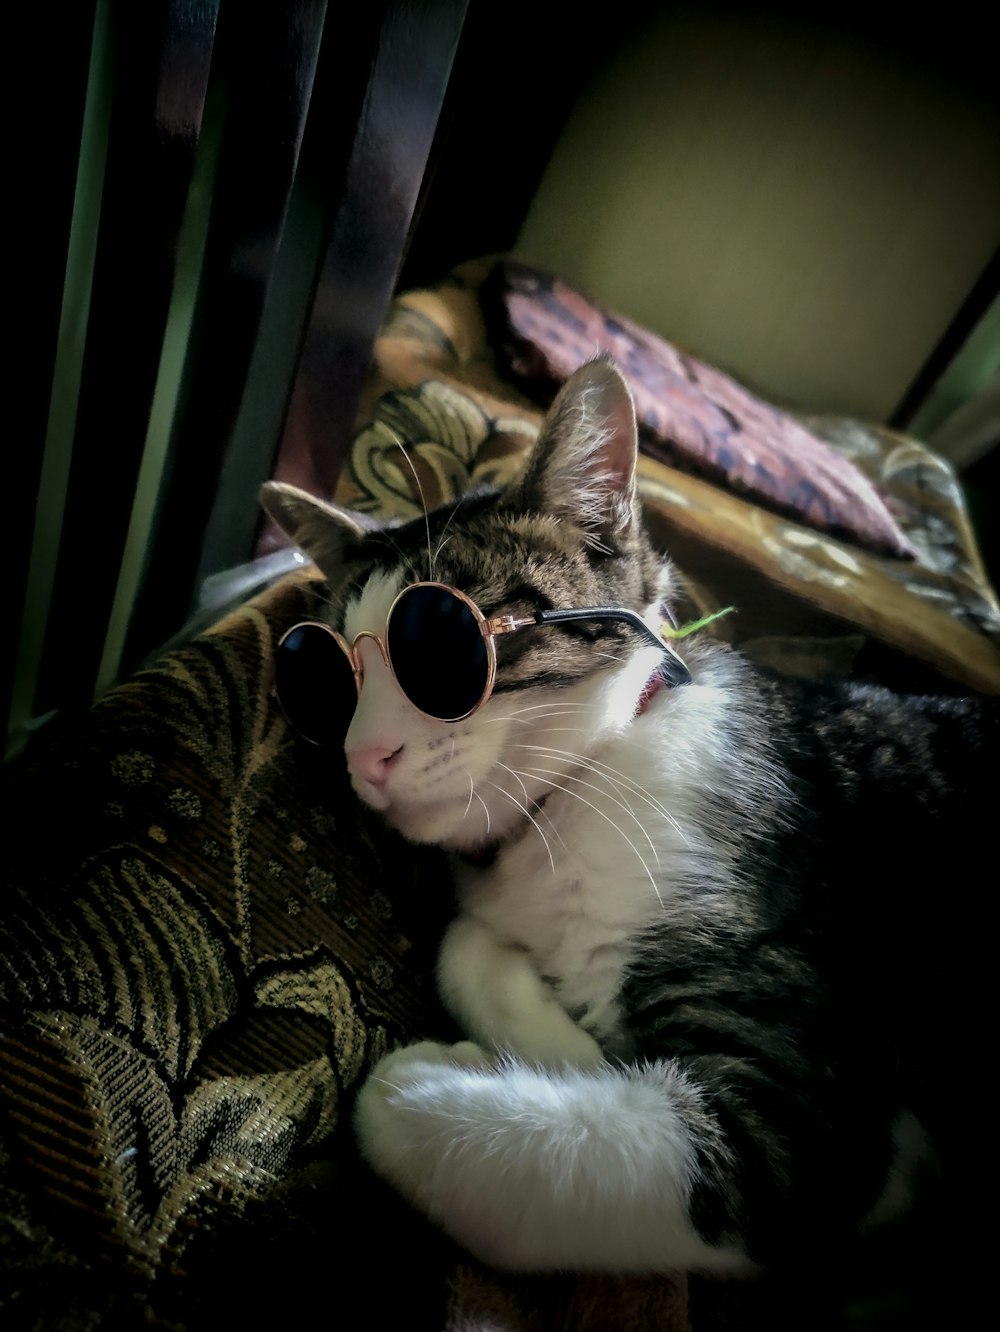 white and black cat wearing sunglasses lying on brown and black floral textile